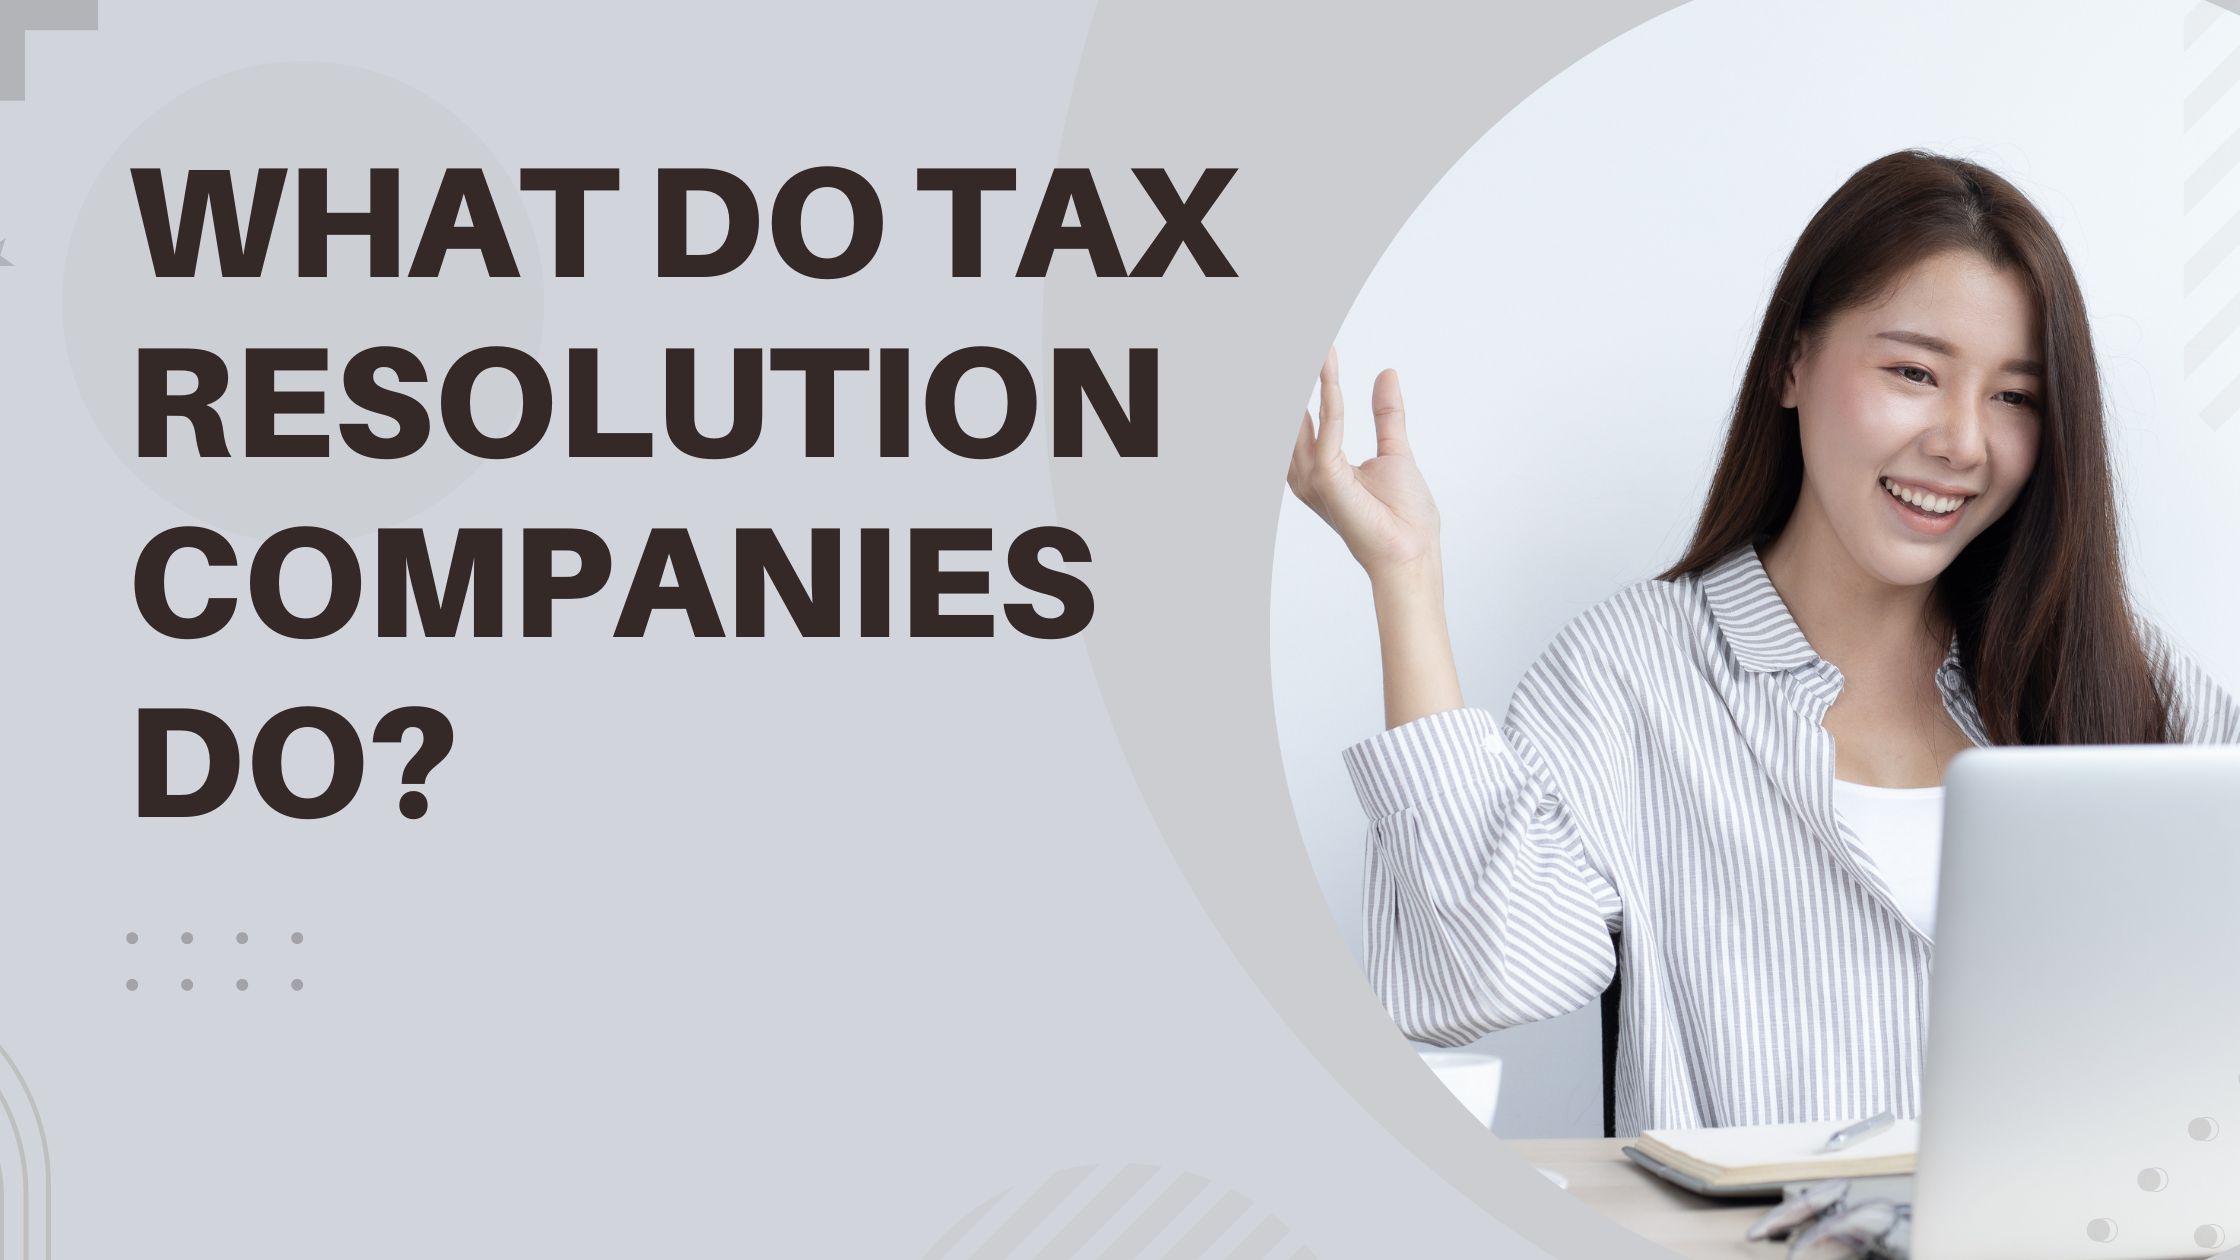 Unraveling Tax Resolution: What Do Tax Resolution Companies Do?